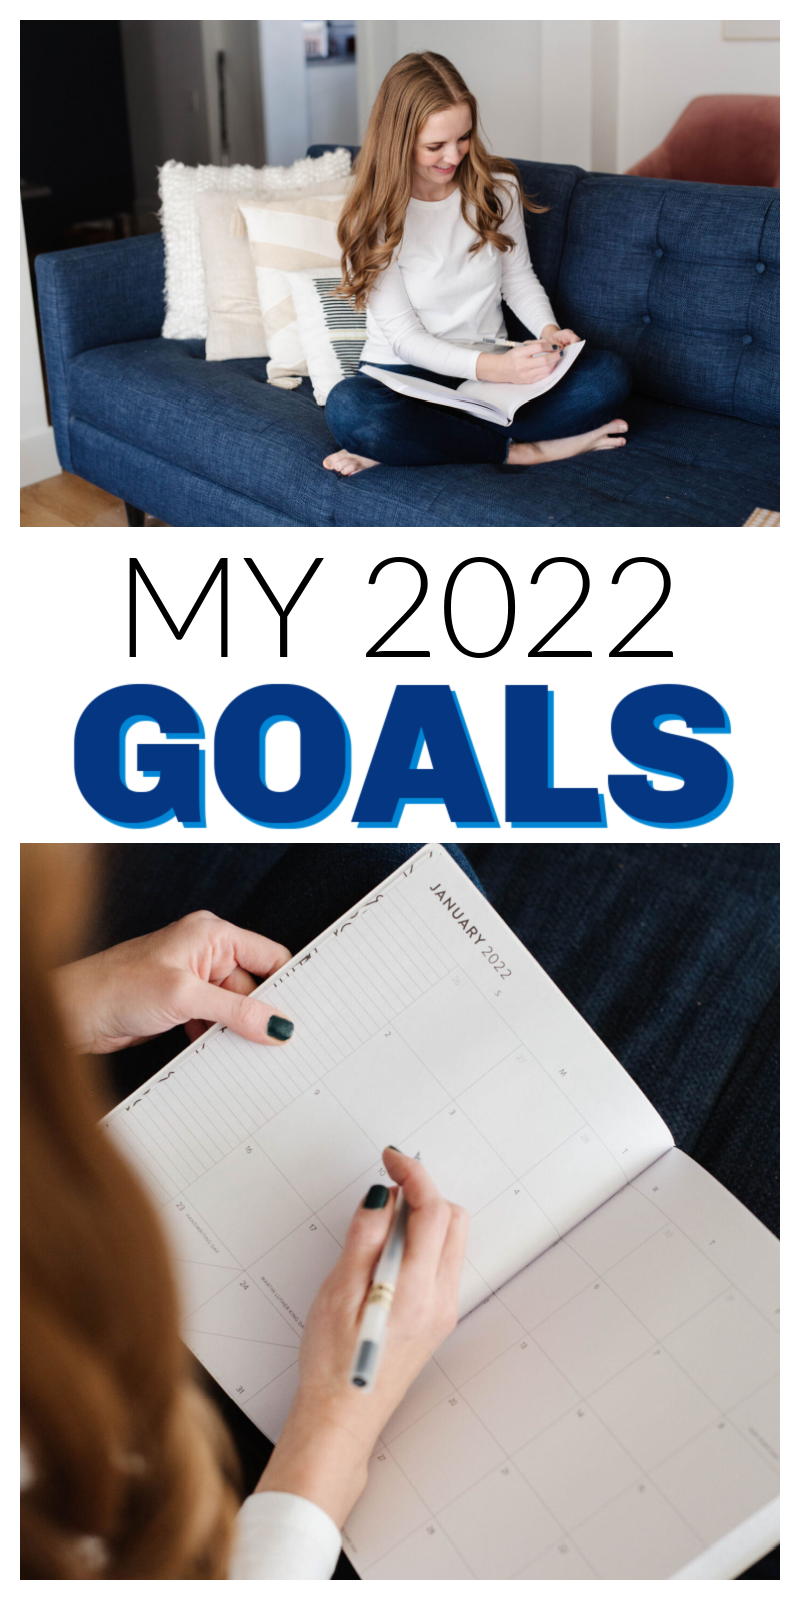 A few of my 2022 goals - Everyday Reading